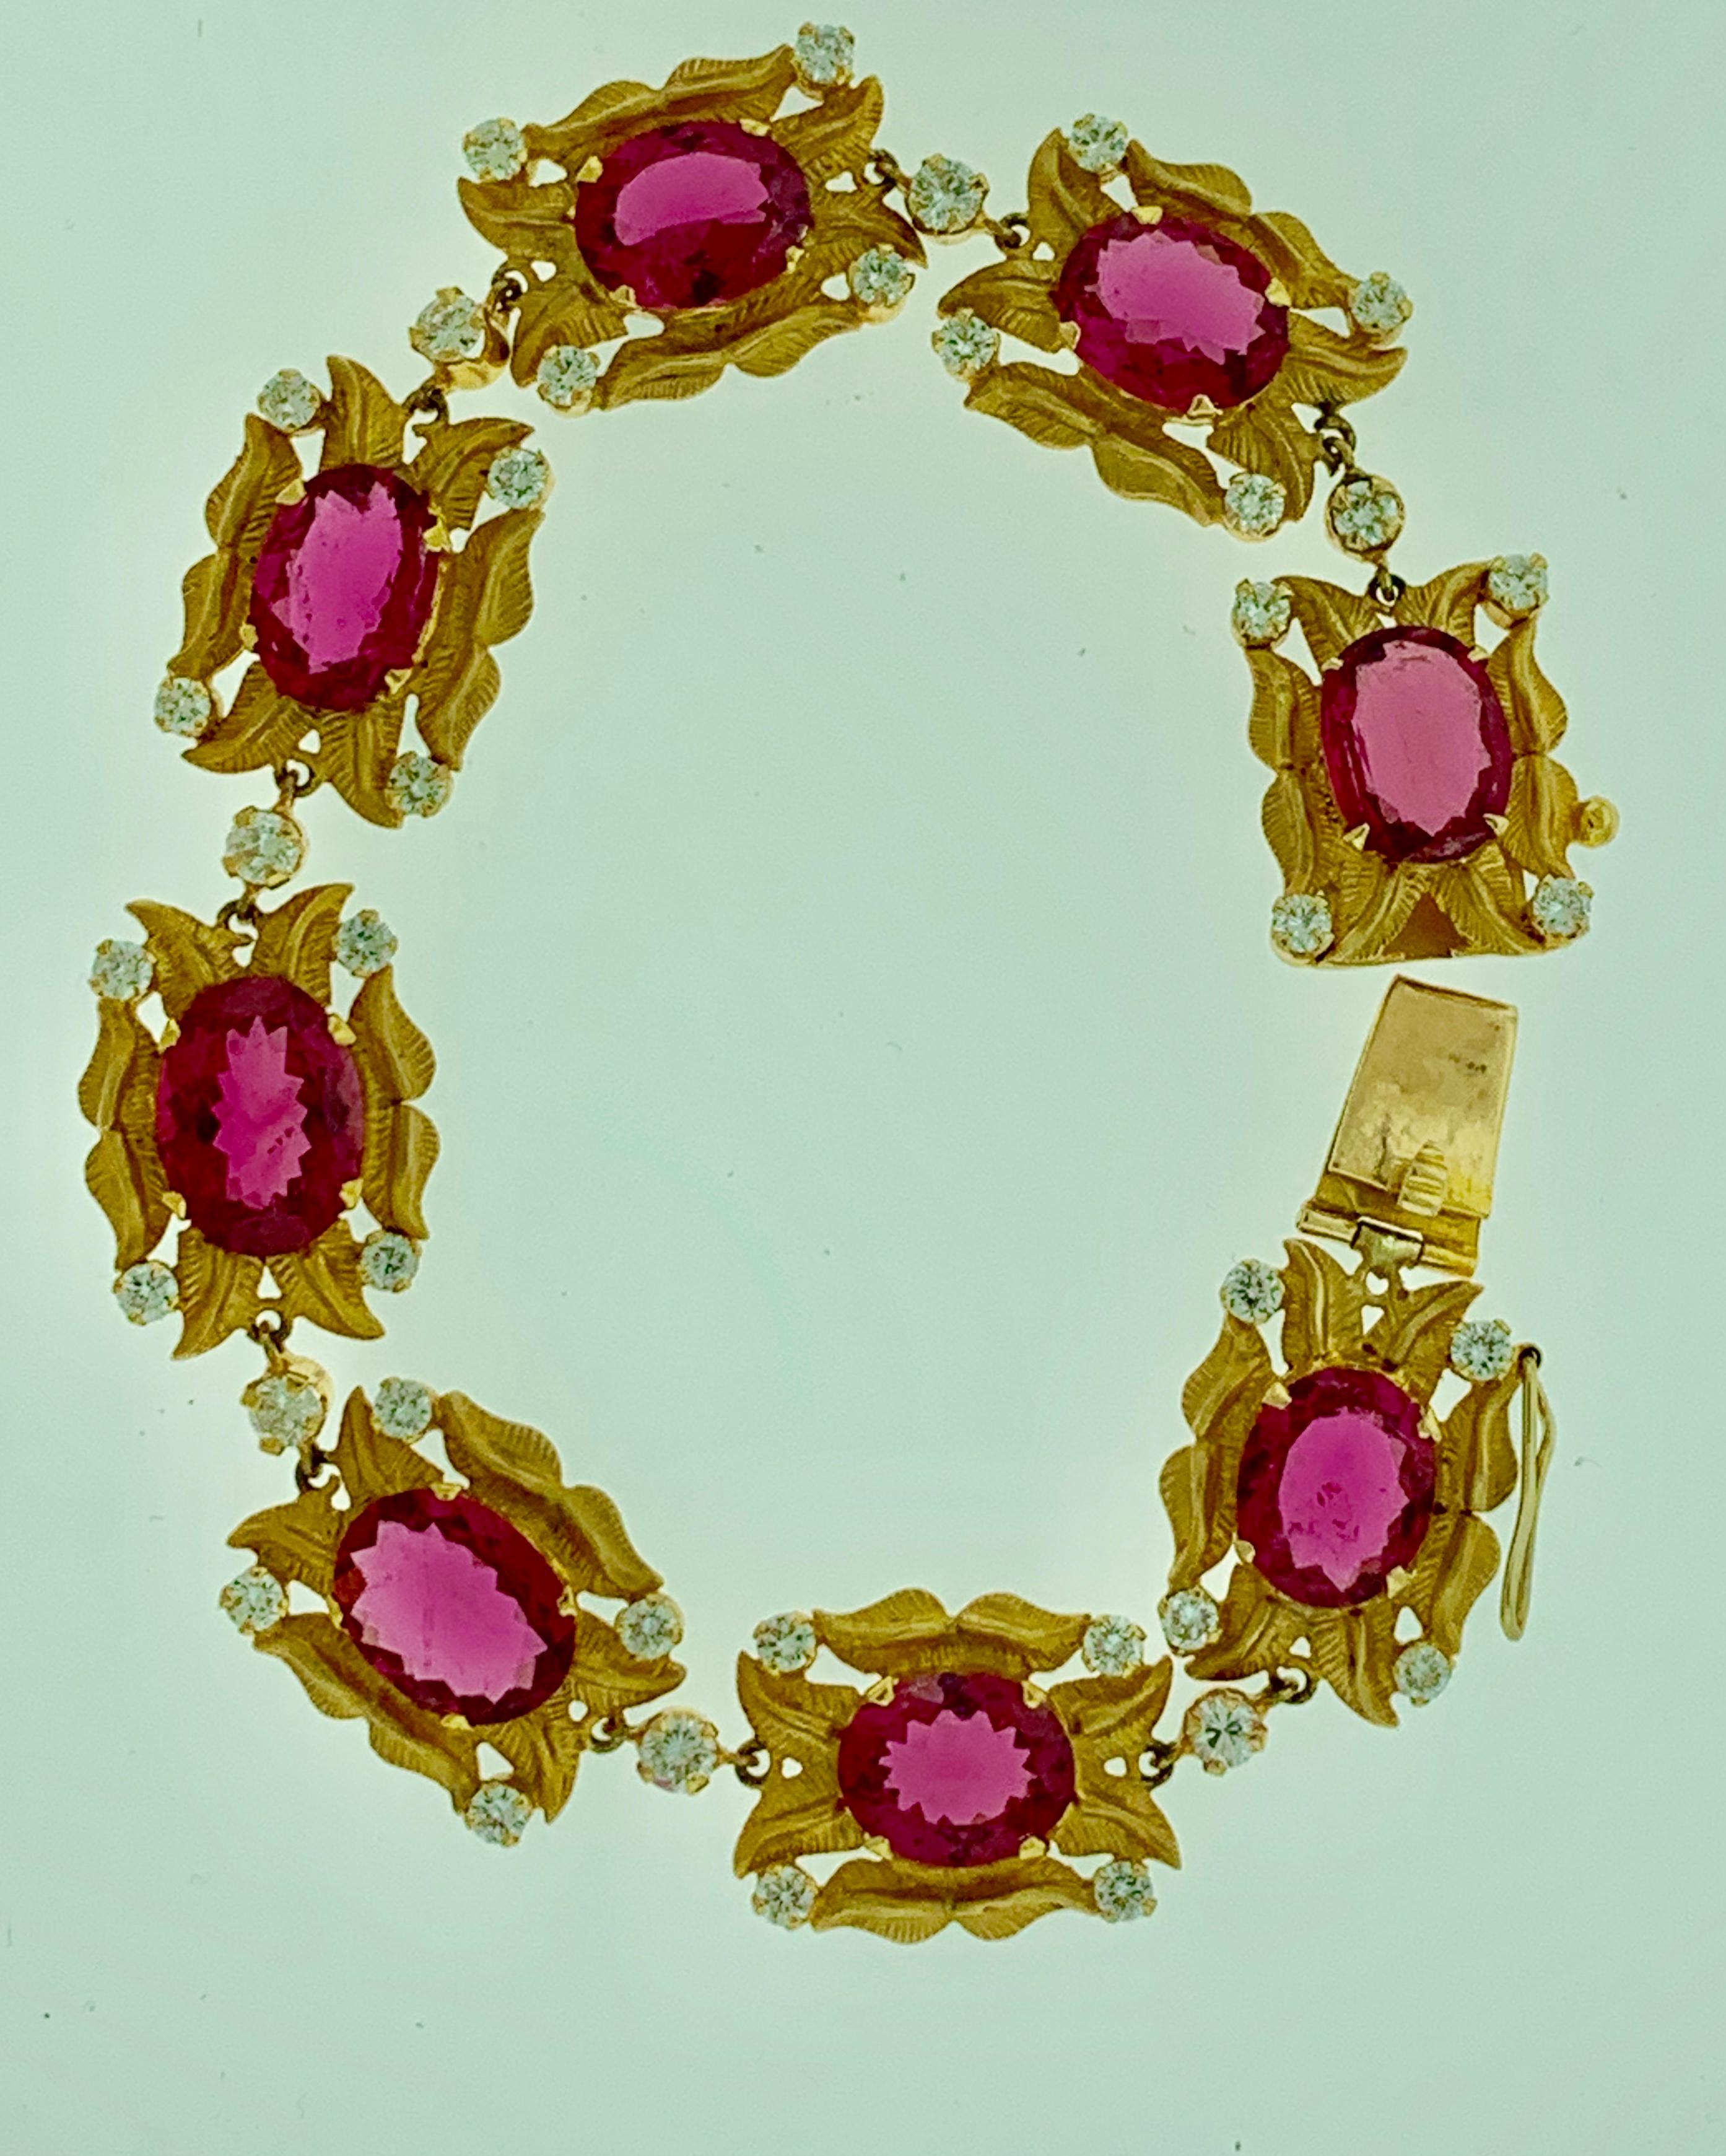 24 Carat Pink Tourmaline and 2.75 Carat Diamond Bracelet  18 Karat Yellow Gold In Excellent Condition For Sale In New York, NY